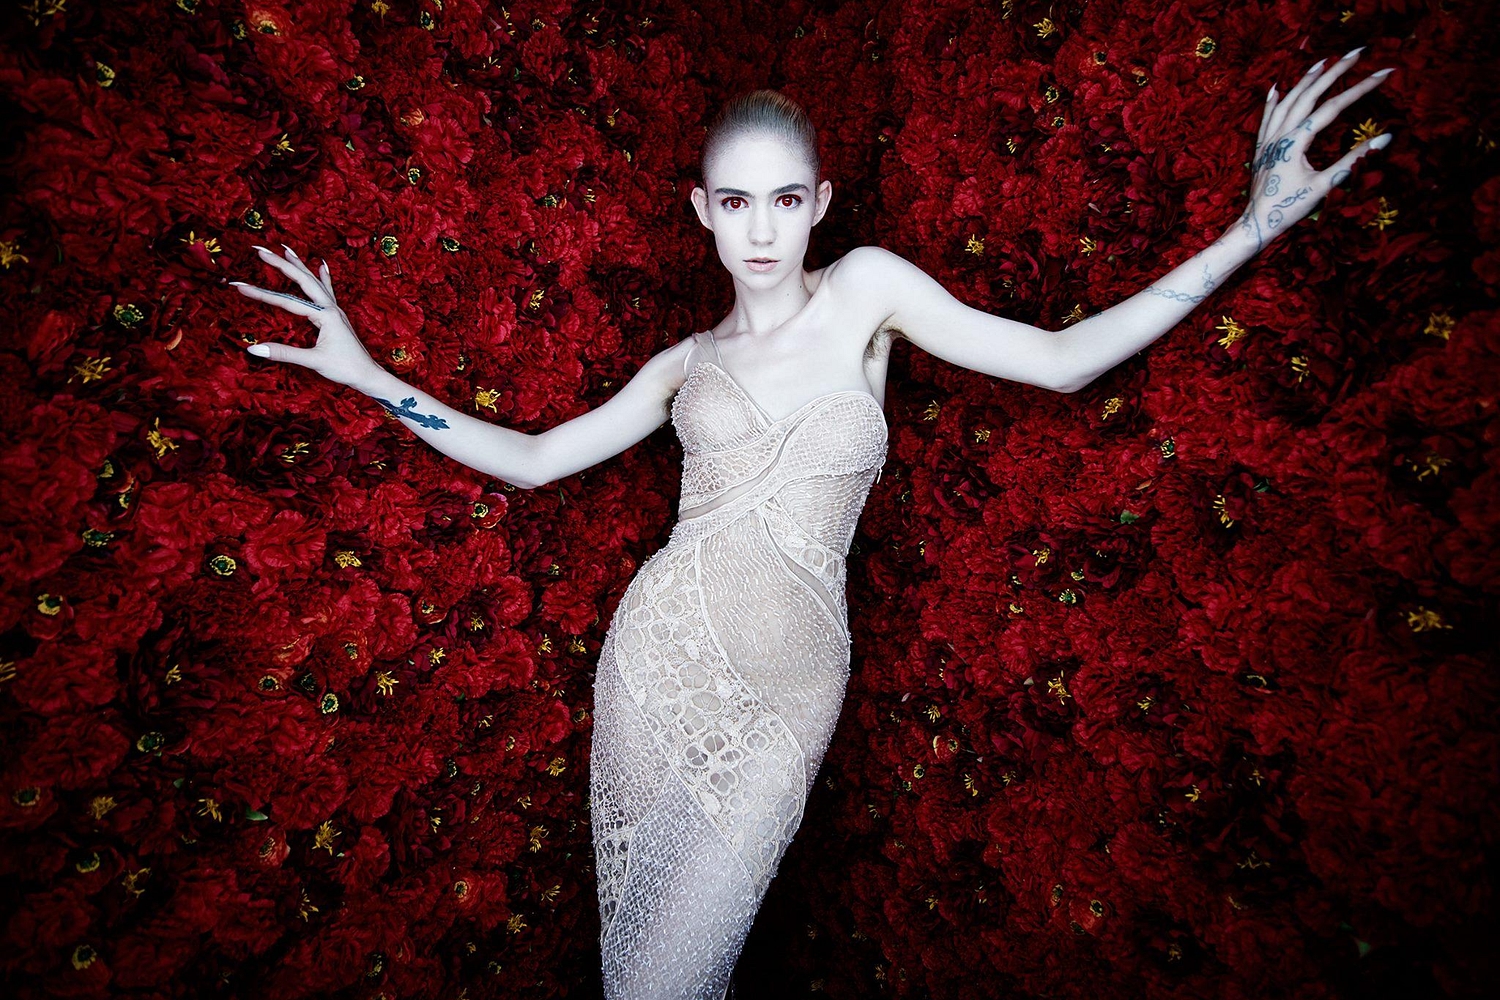 Grimes has launched a new Instagram dedicated to visual art